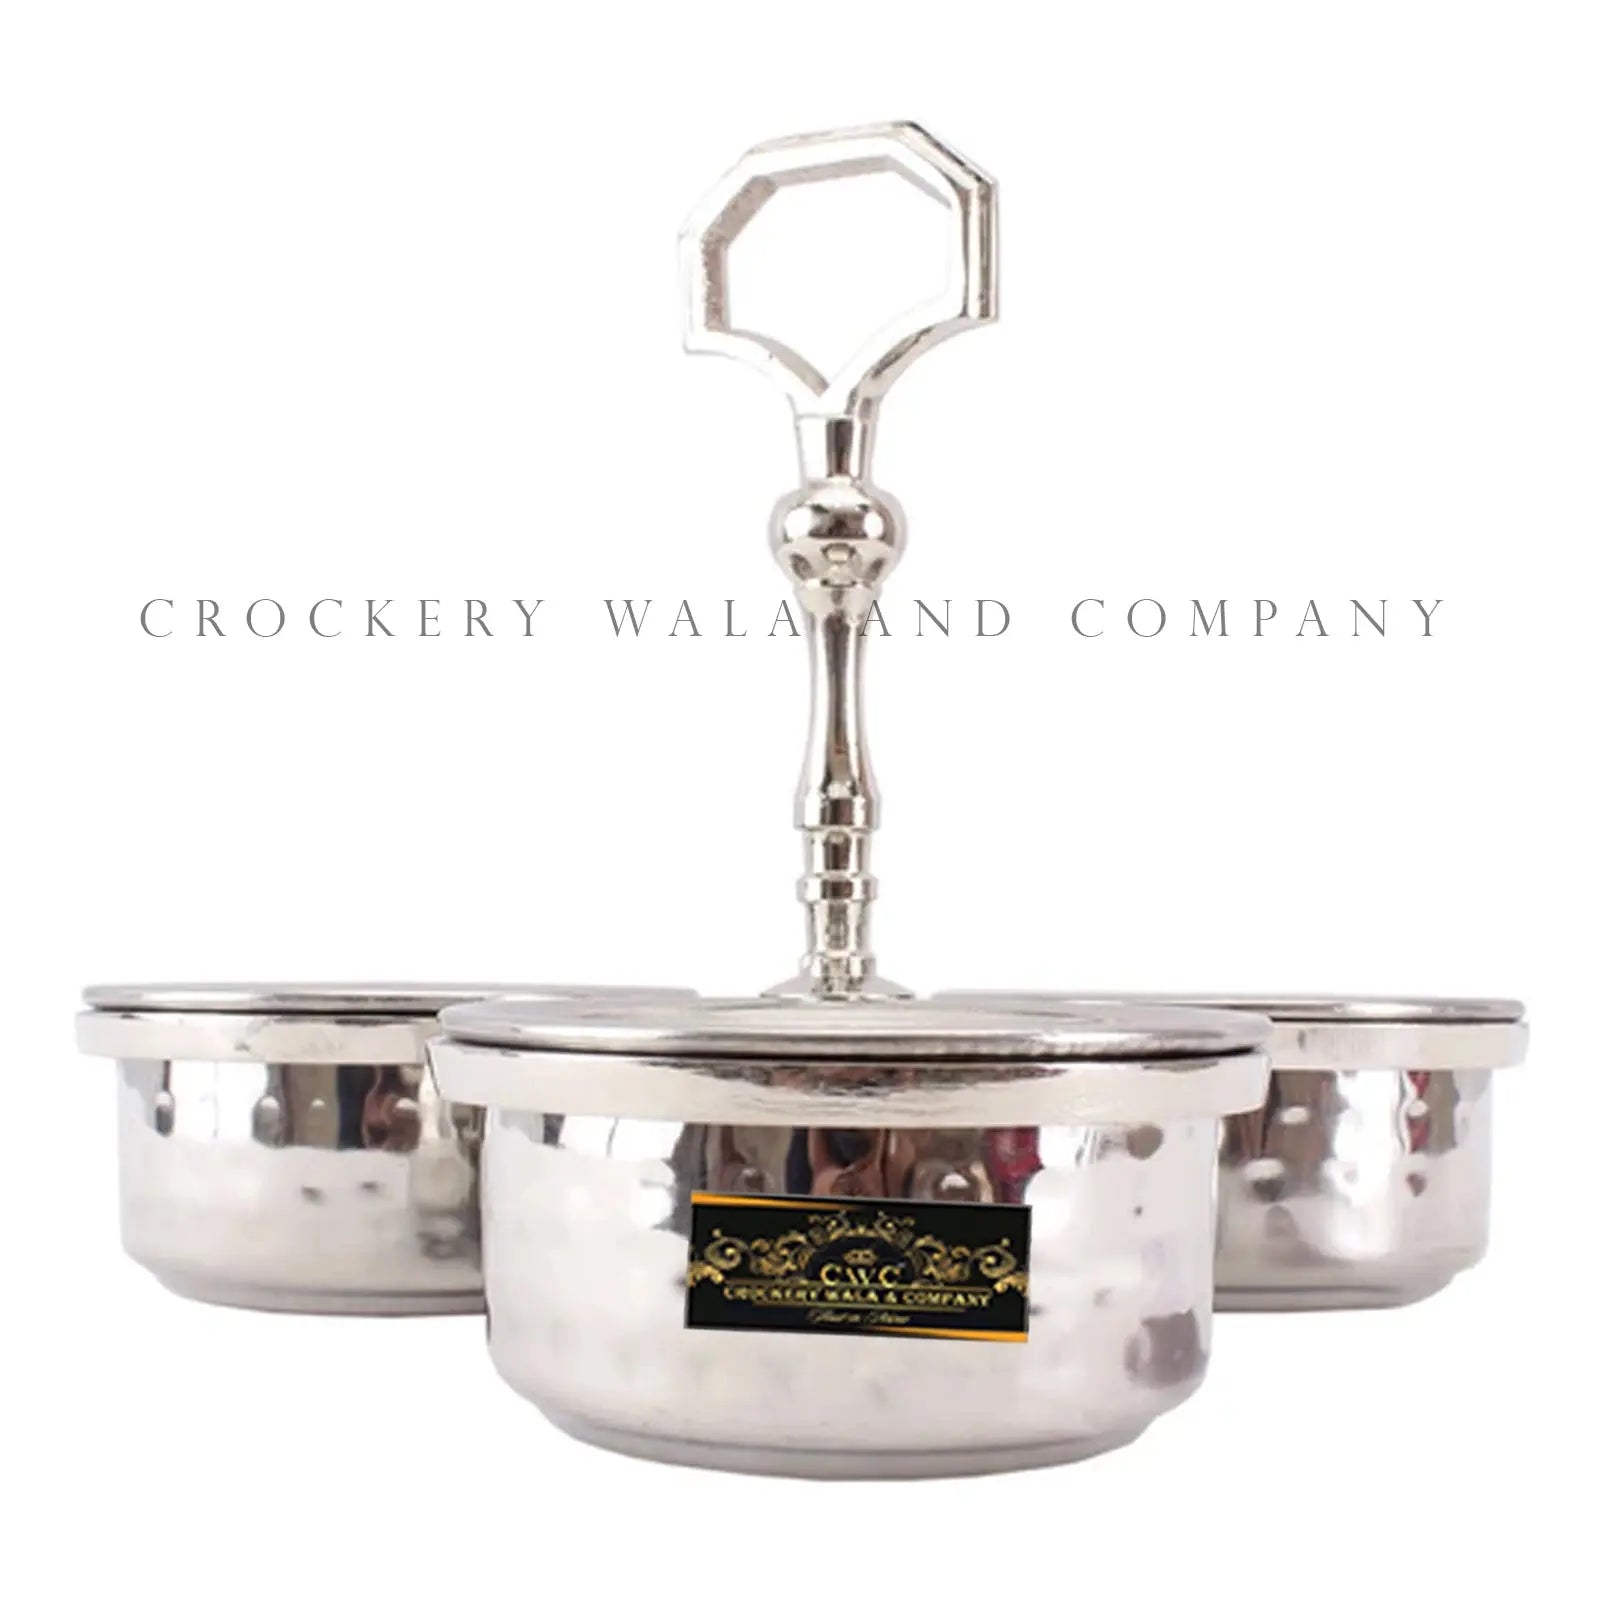 Crockery Wala And Company Stainless Steel Pickle Bowl Set Hammered Design Condimental Pickle Set With Handle - CROCKERY WALA AND COMPANY 